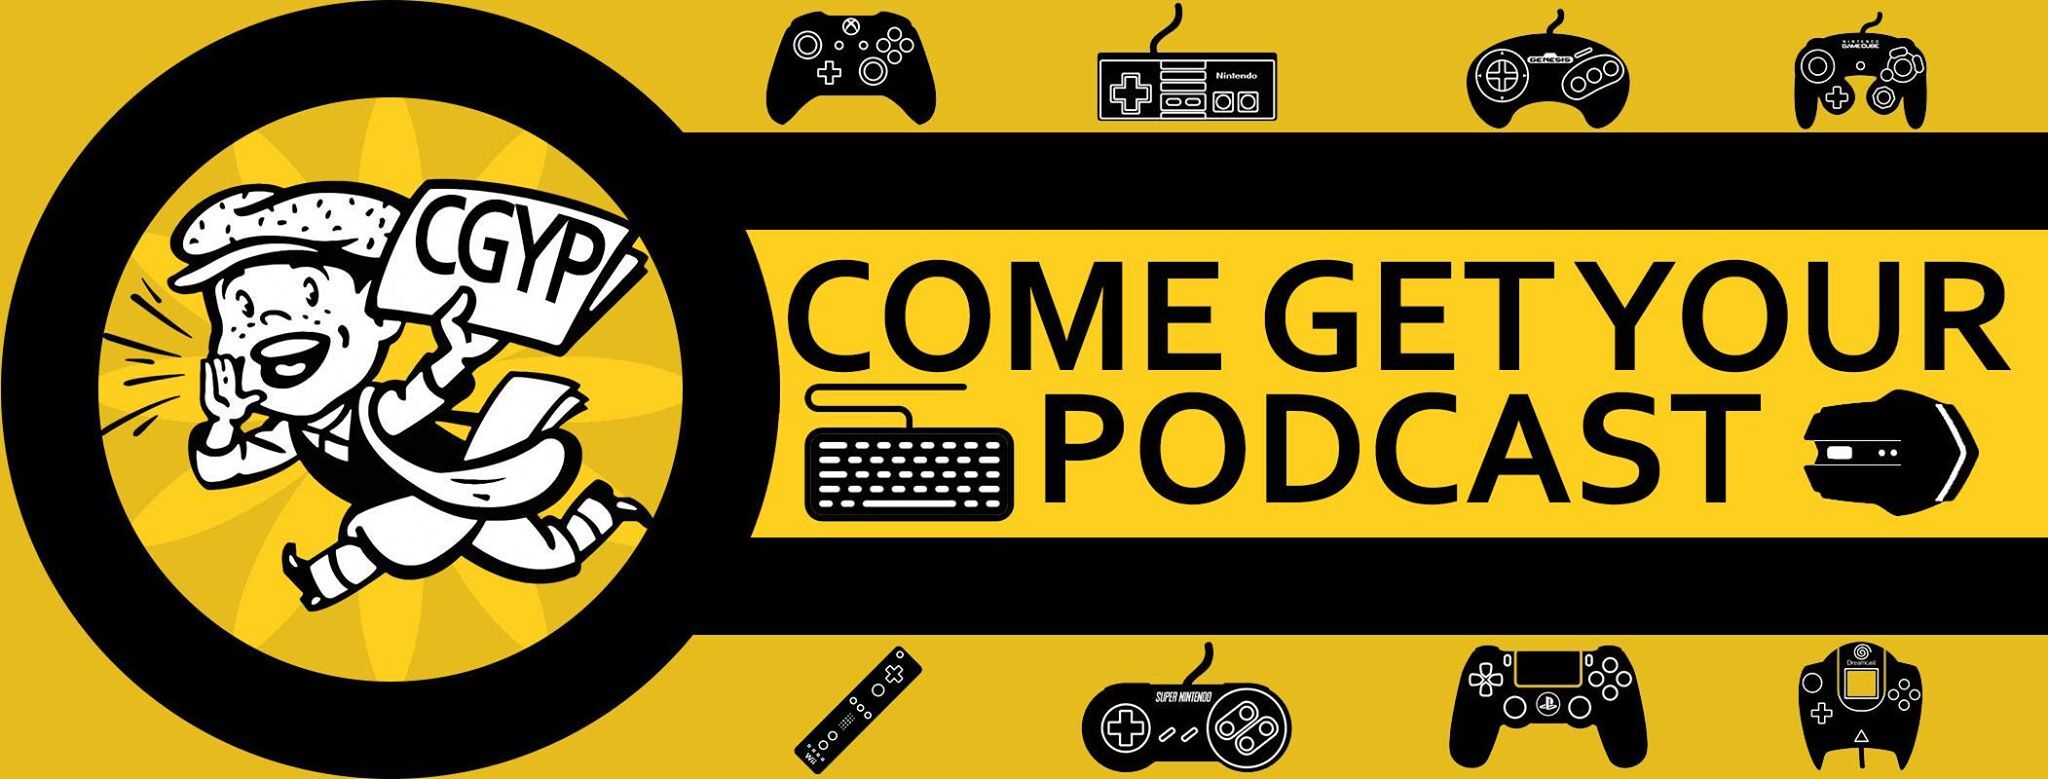 Come Get Your Podcast: A Haven for Nerds